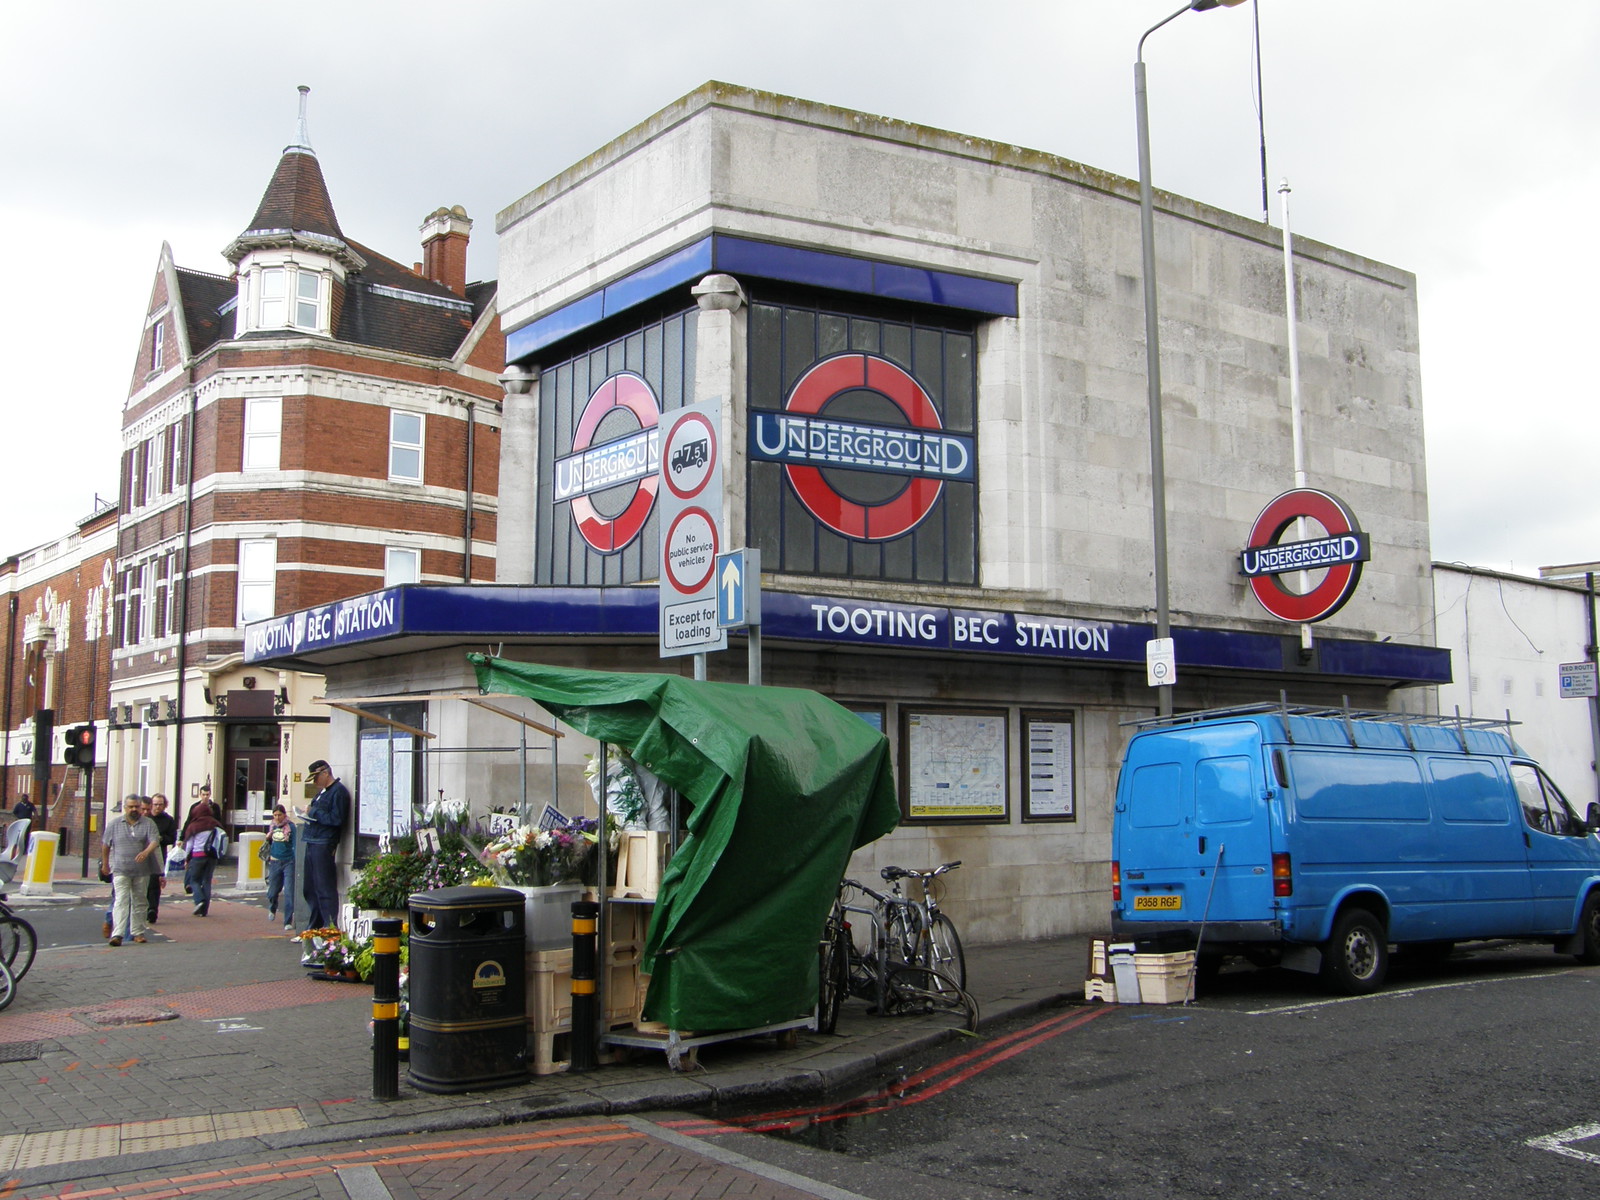 The smaller entrance to Tooting Bec station on the east side of the road